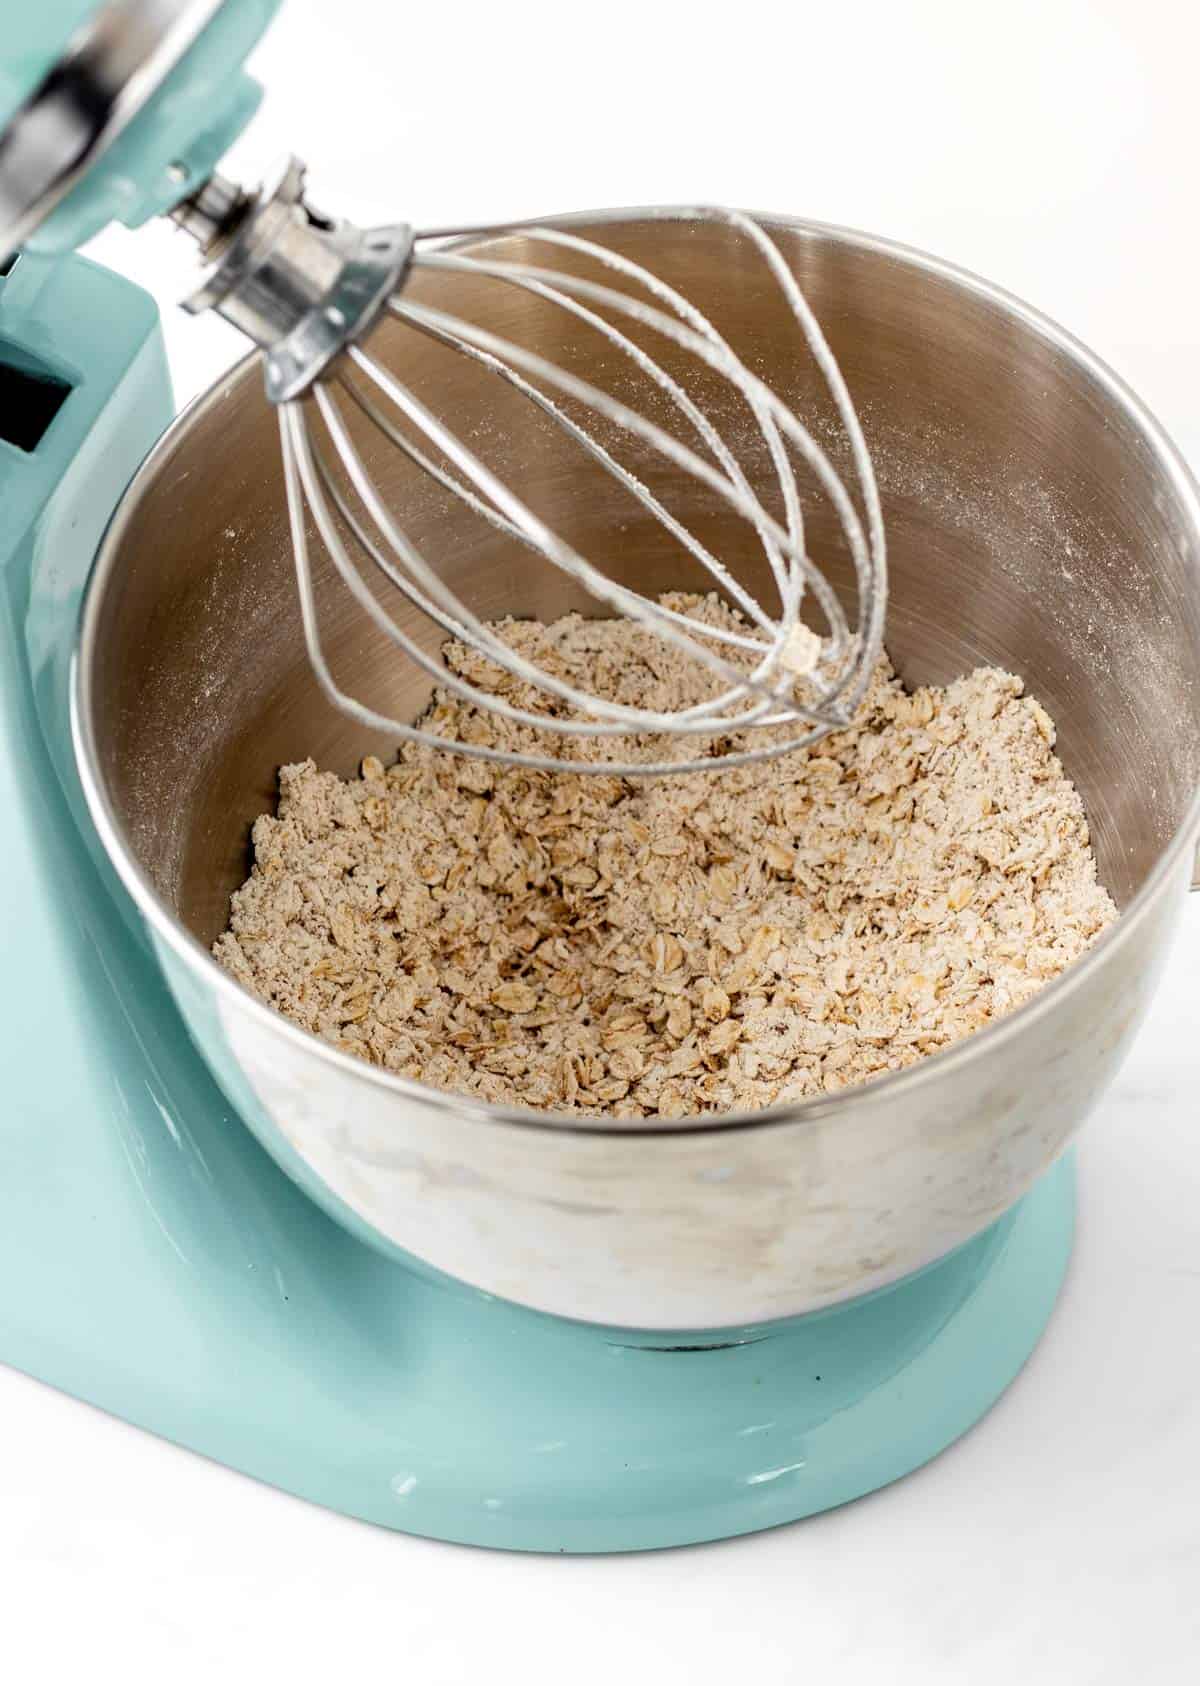 Grinding the oats in a stand mixer.